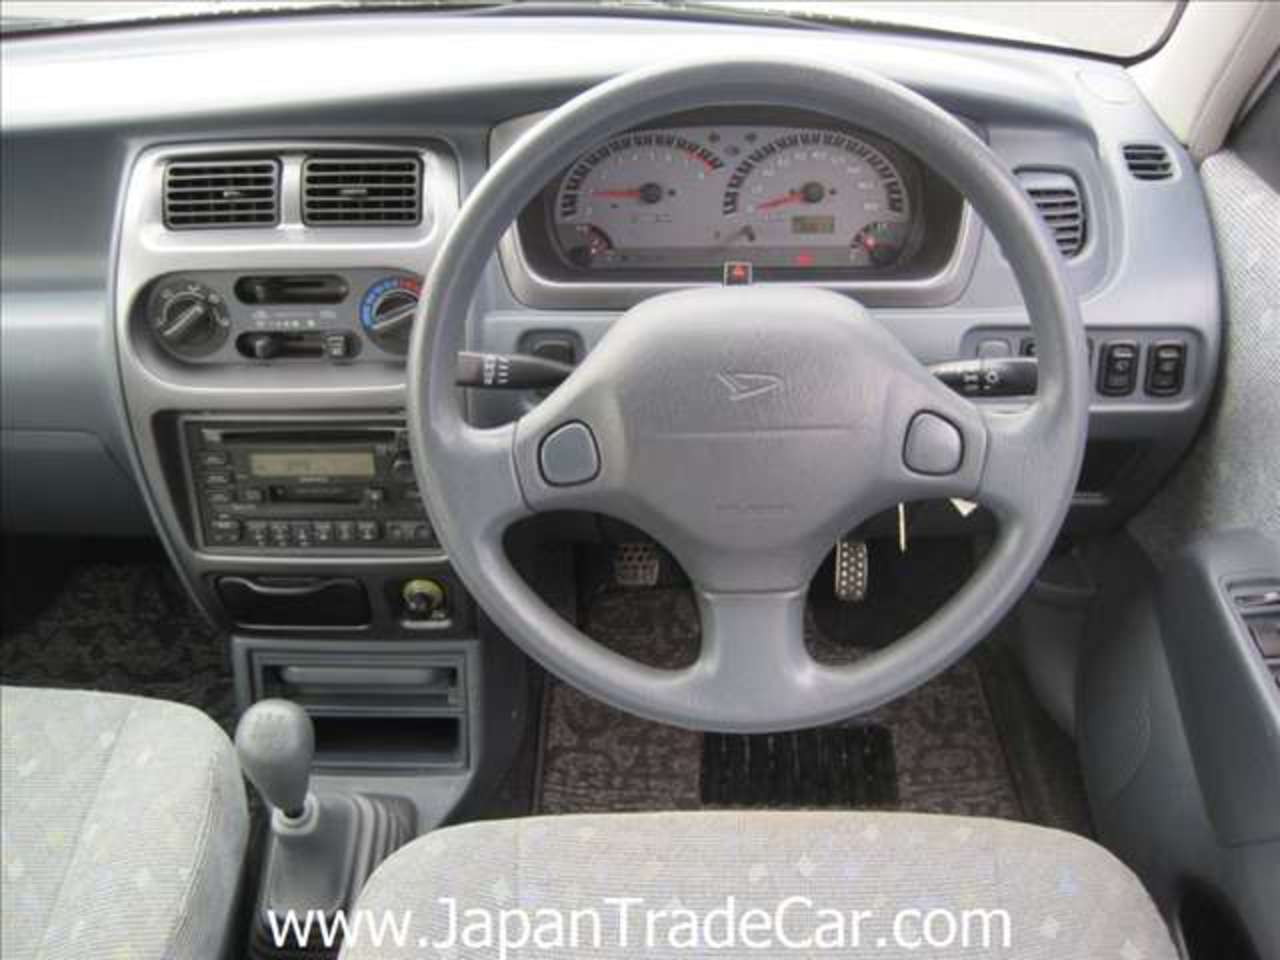 Used Daihatsu Storia sold from Japan Chassis M100S-020319 FOB ...